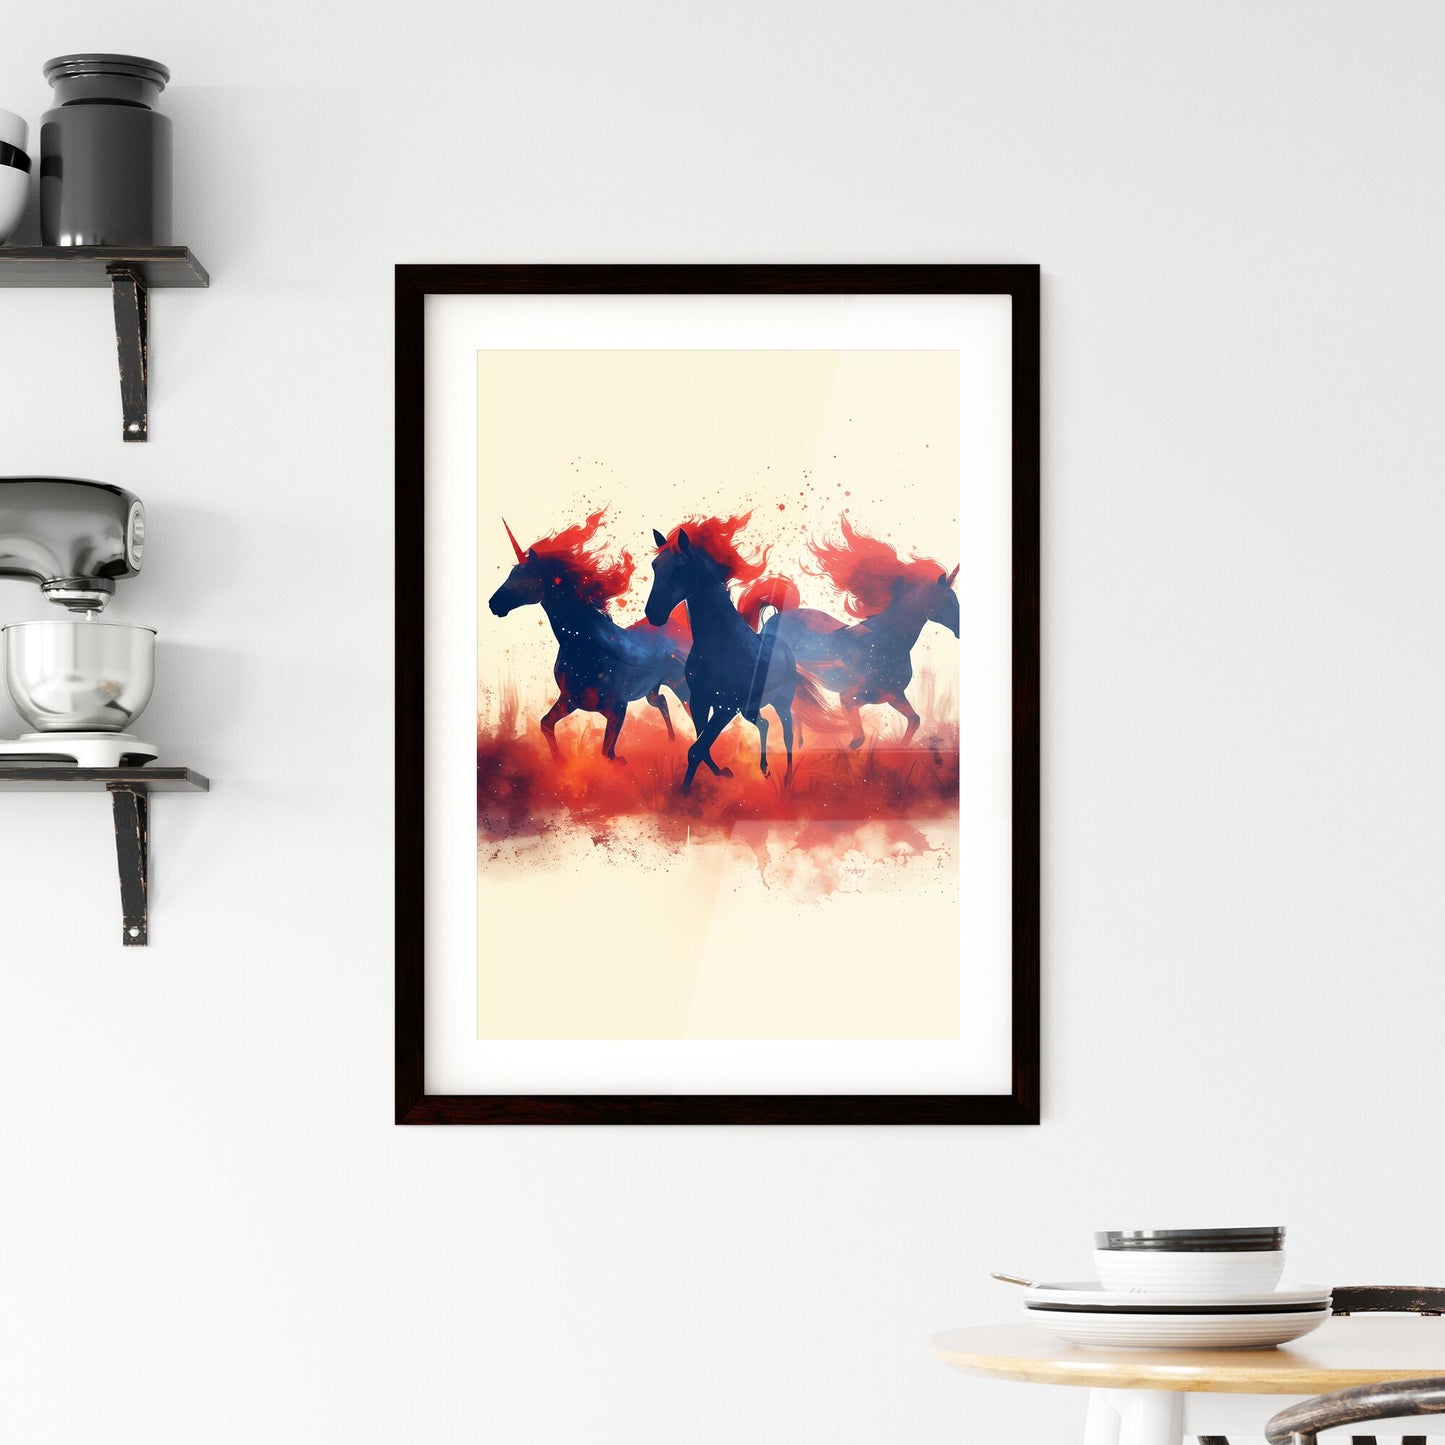 With the text Happy Birthday in whimsical script font - Art print of a group of horses running with red manes Default Title